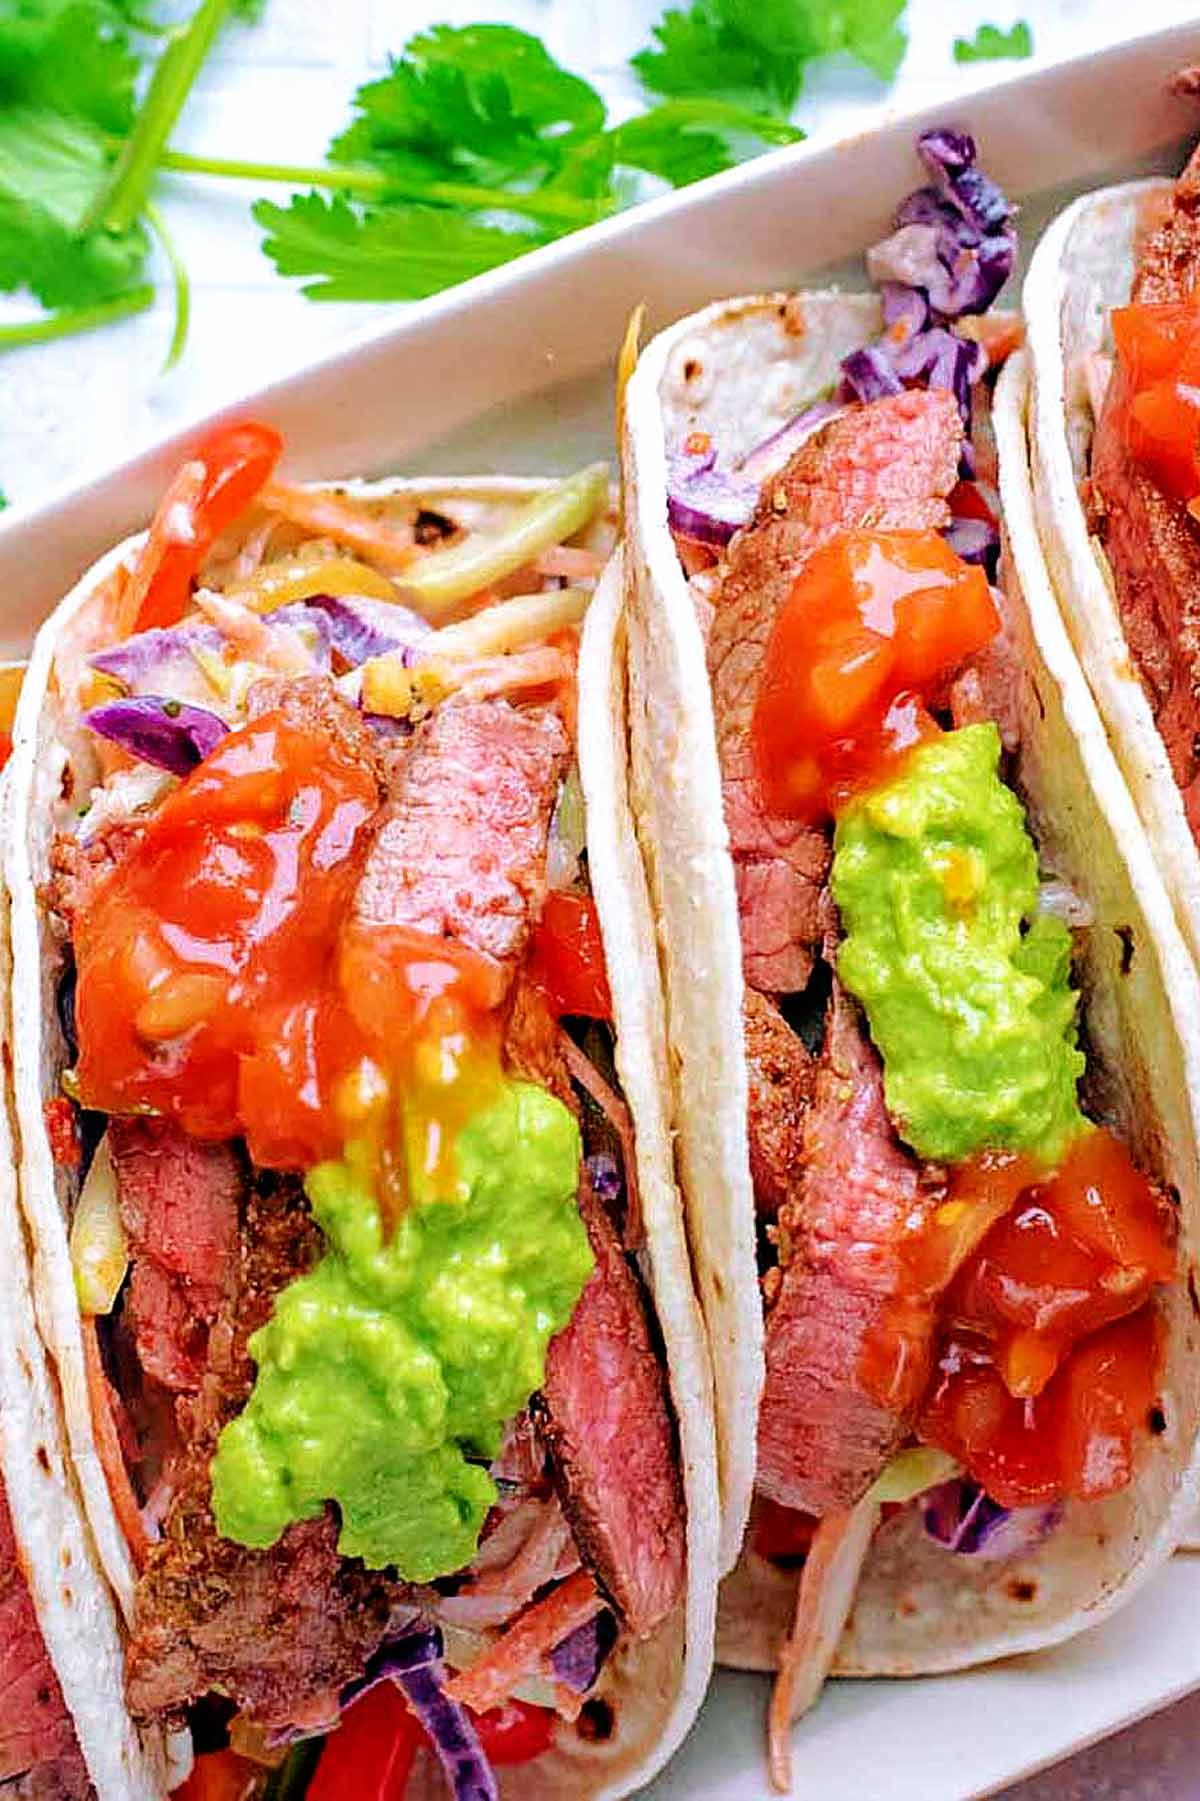 Steak tacos topped with salsa and guacamole.